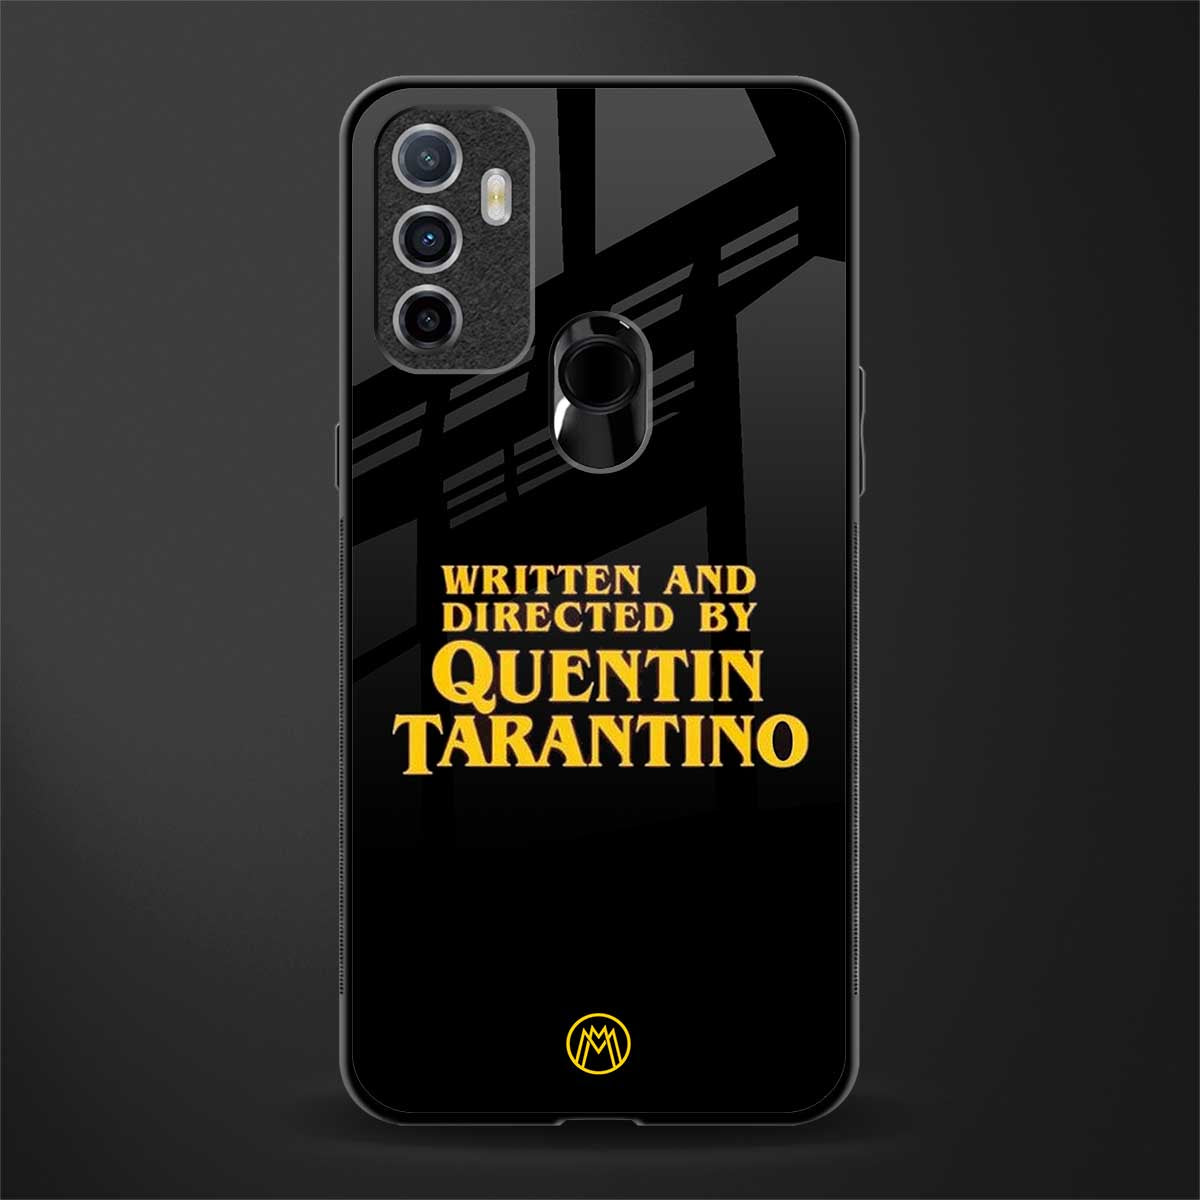 quentin tarantino glass case for oppo a53 image